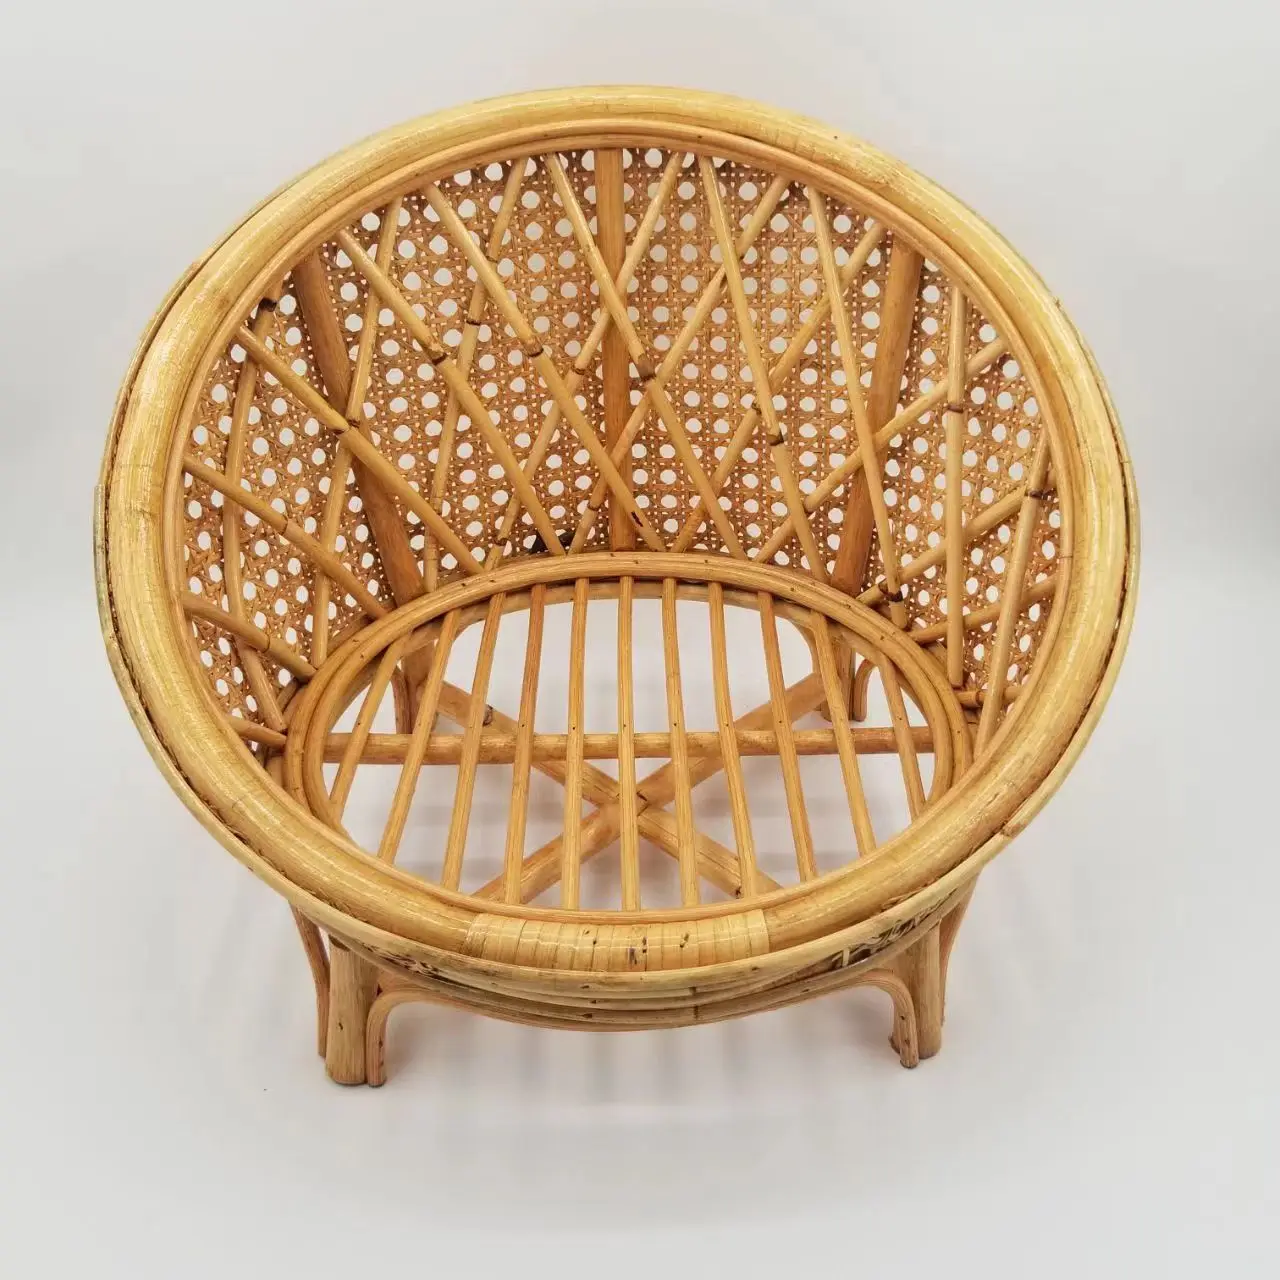 Newborn Photography Props Baby Chair Crib Rattan Retro Crafts Firm Baby Small Furniture Photo Studio Photography Accessories